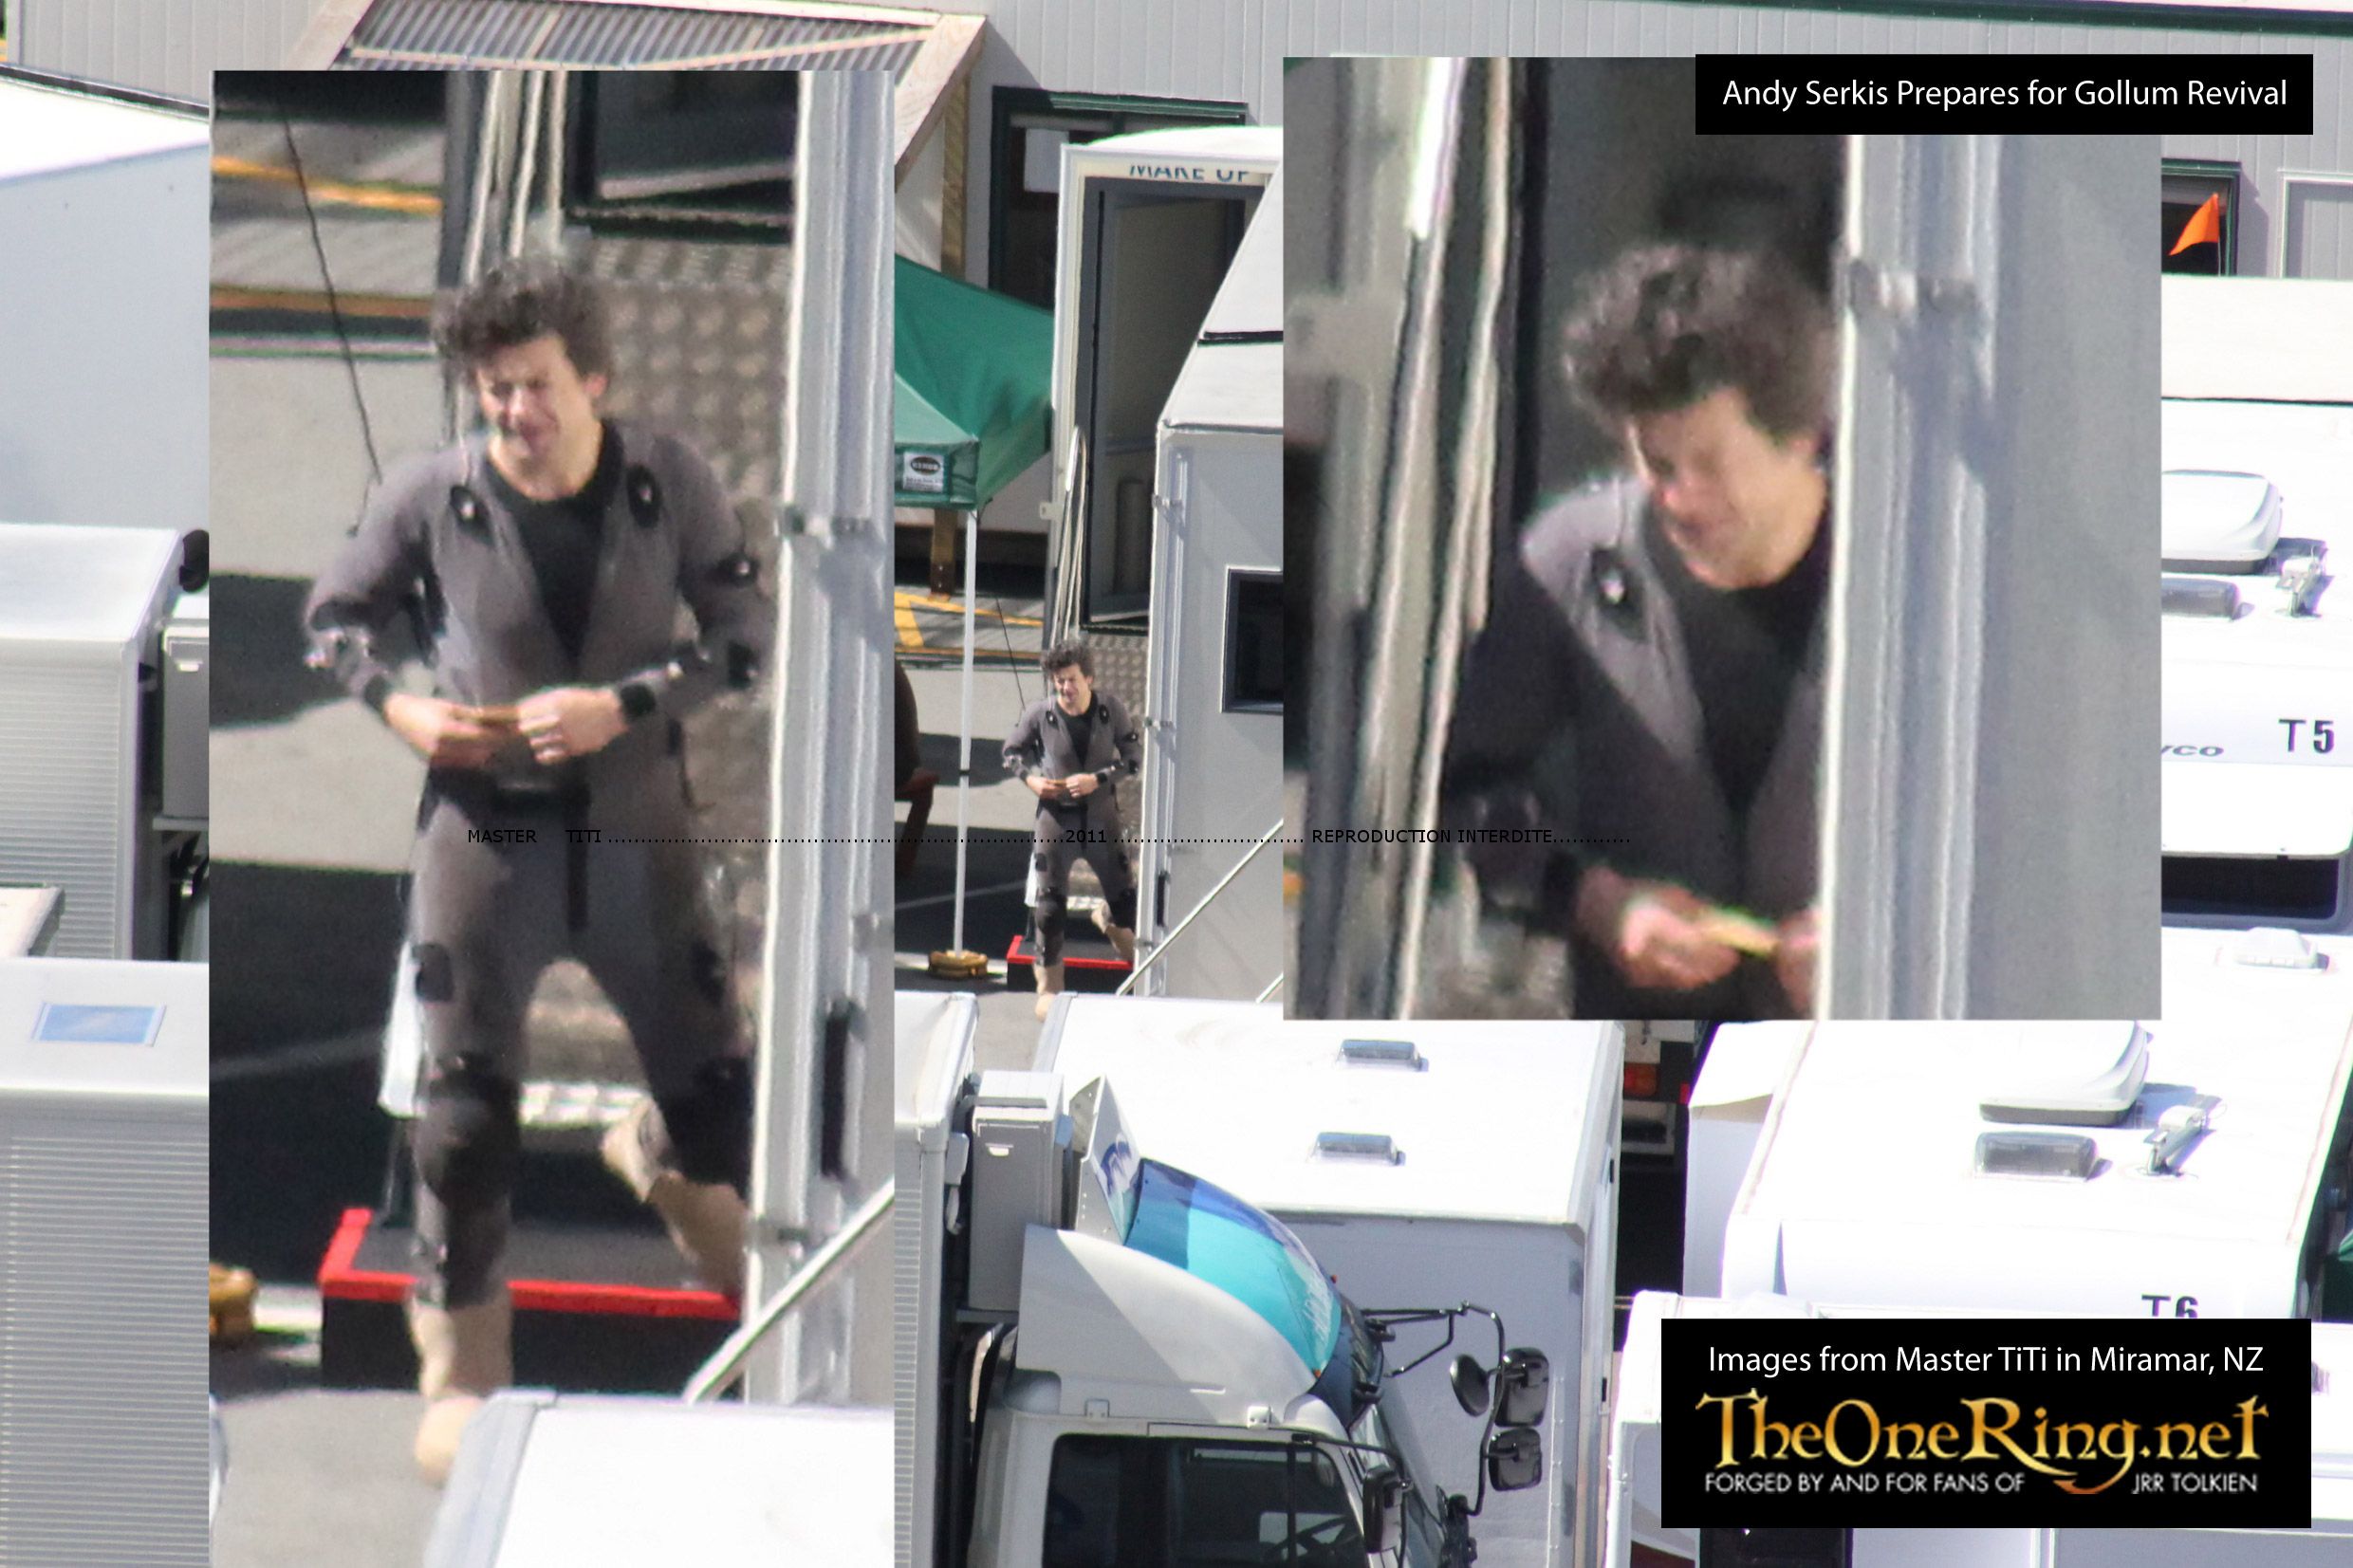 Andy Serkis on the set of The Hobbit